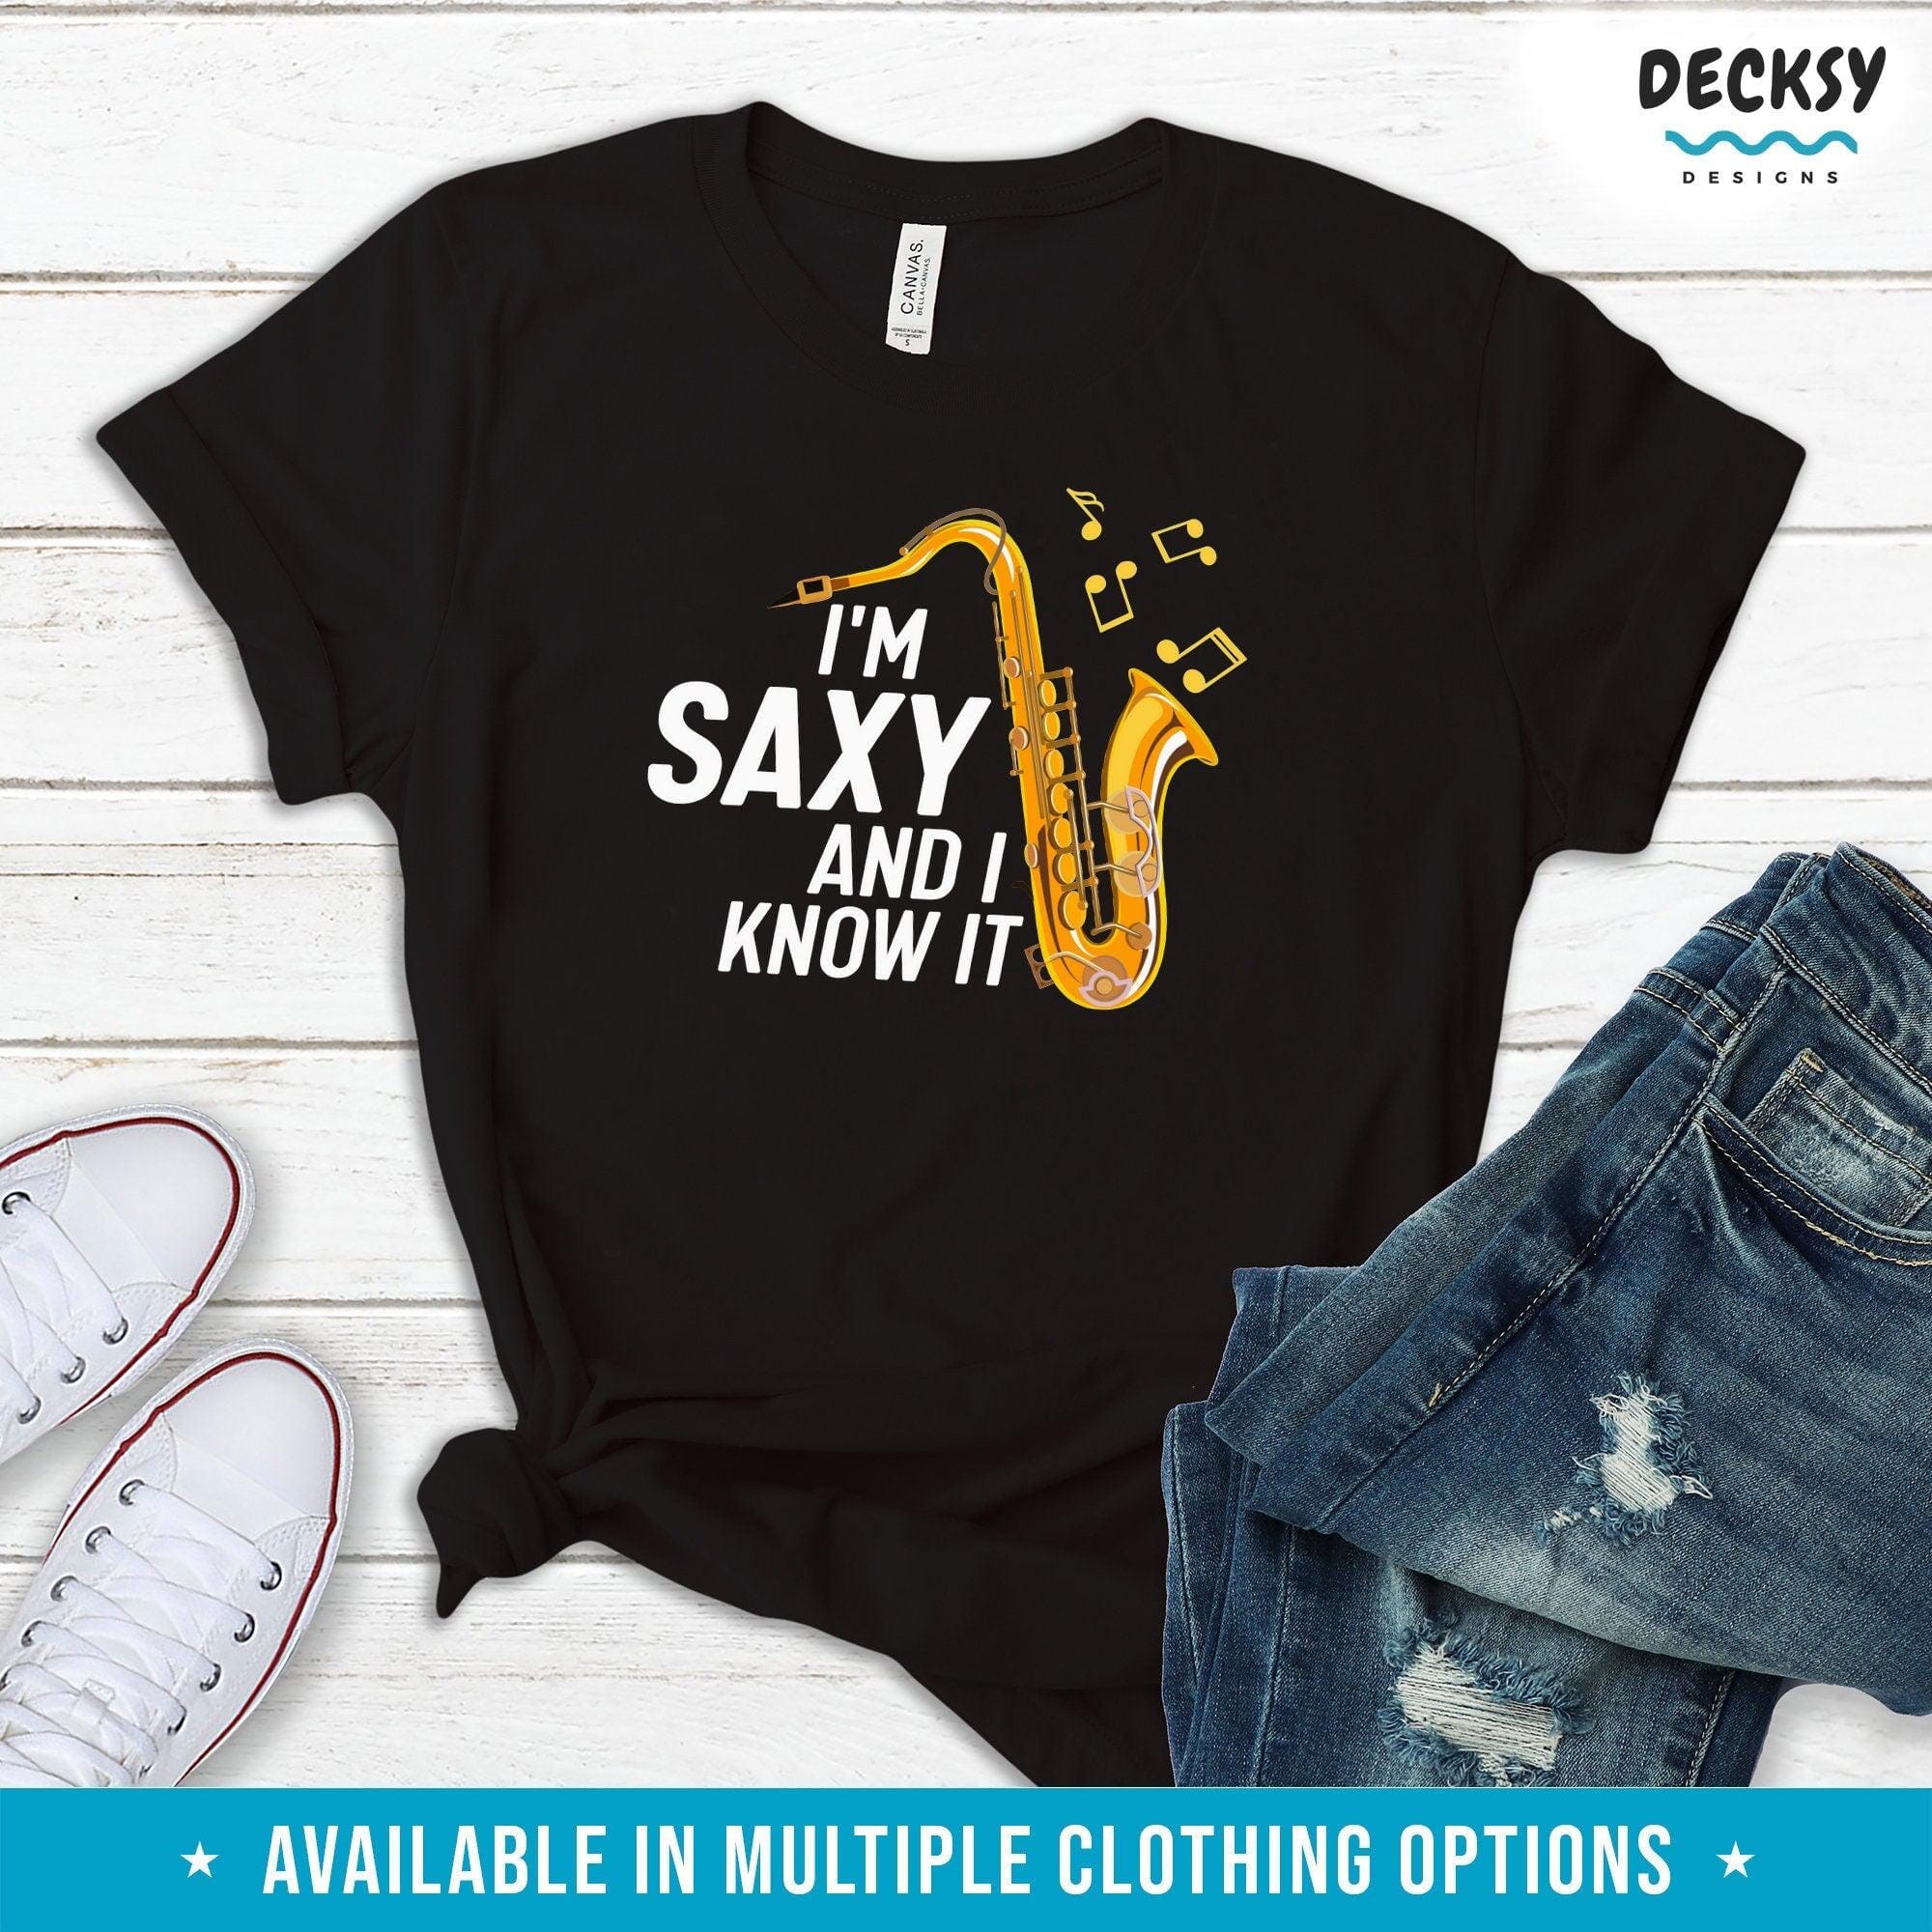 Saxophonist Shirt, Gift For Sax Player-Clothing:Gender-Neutral Adult Clothing:Tops & Tees:T-shirts:Graphic Tees-DecksyDesigns